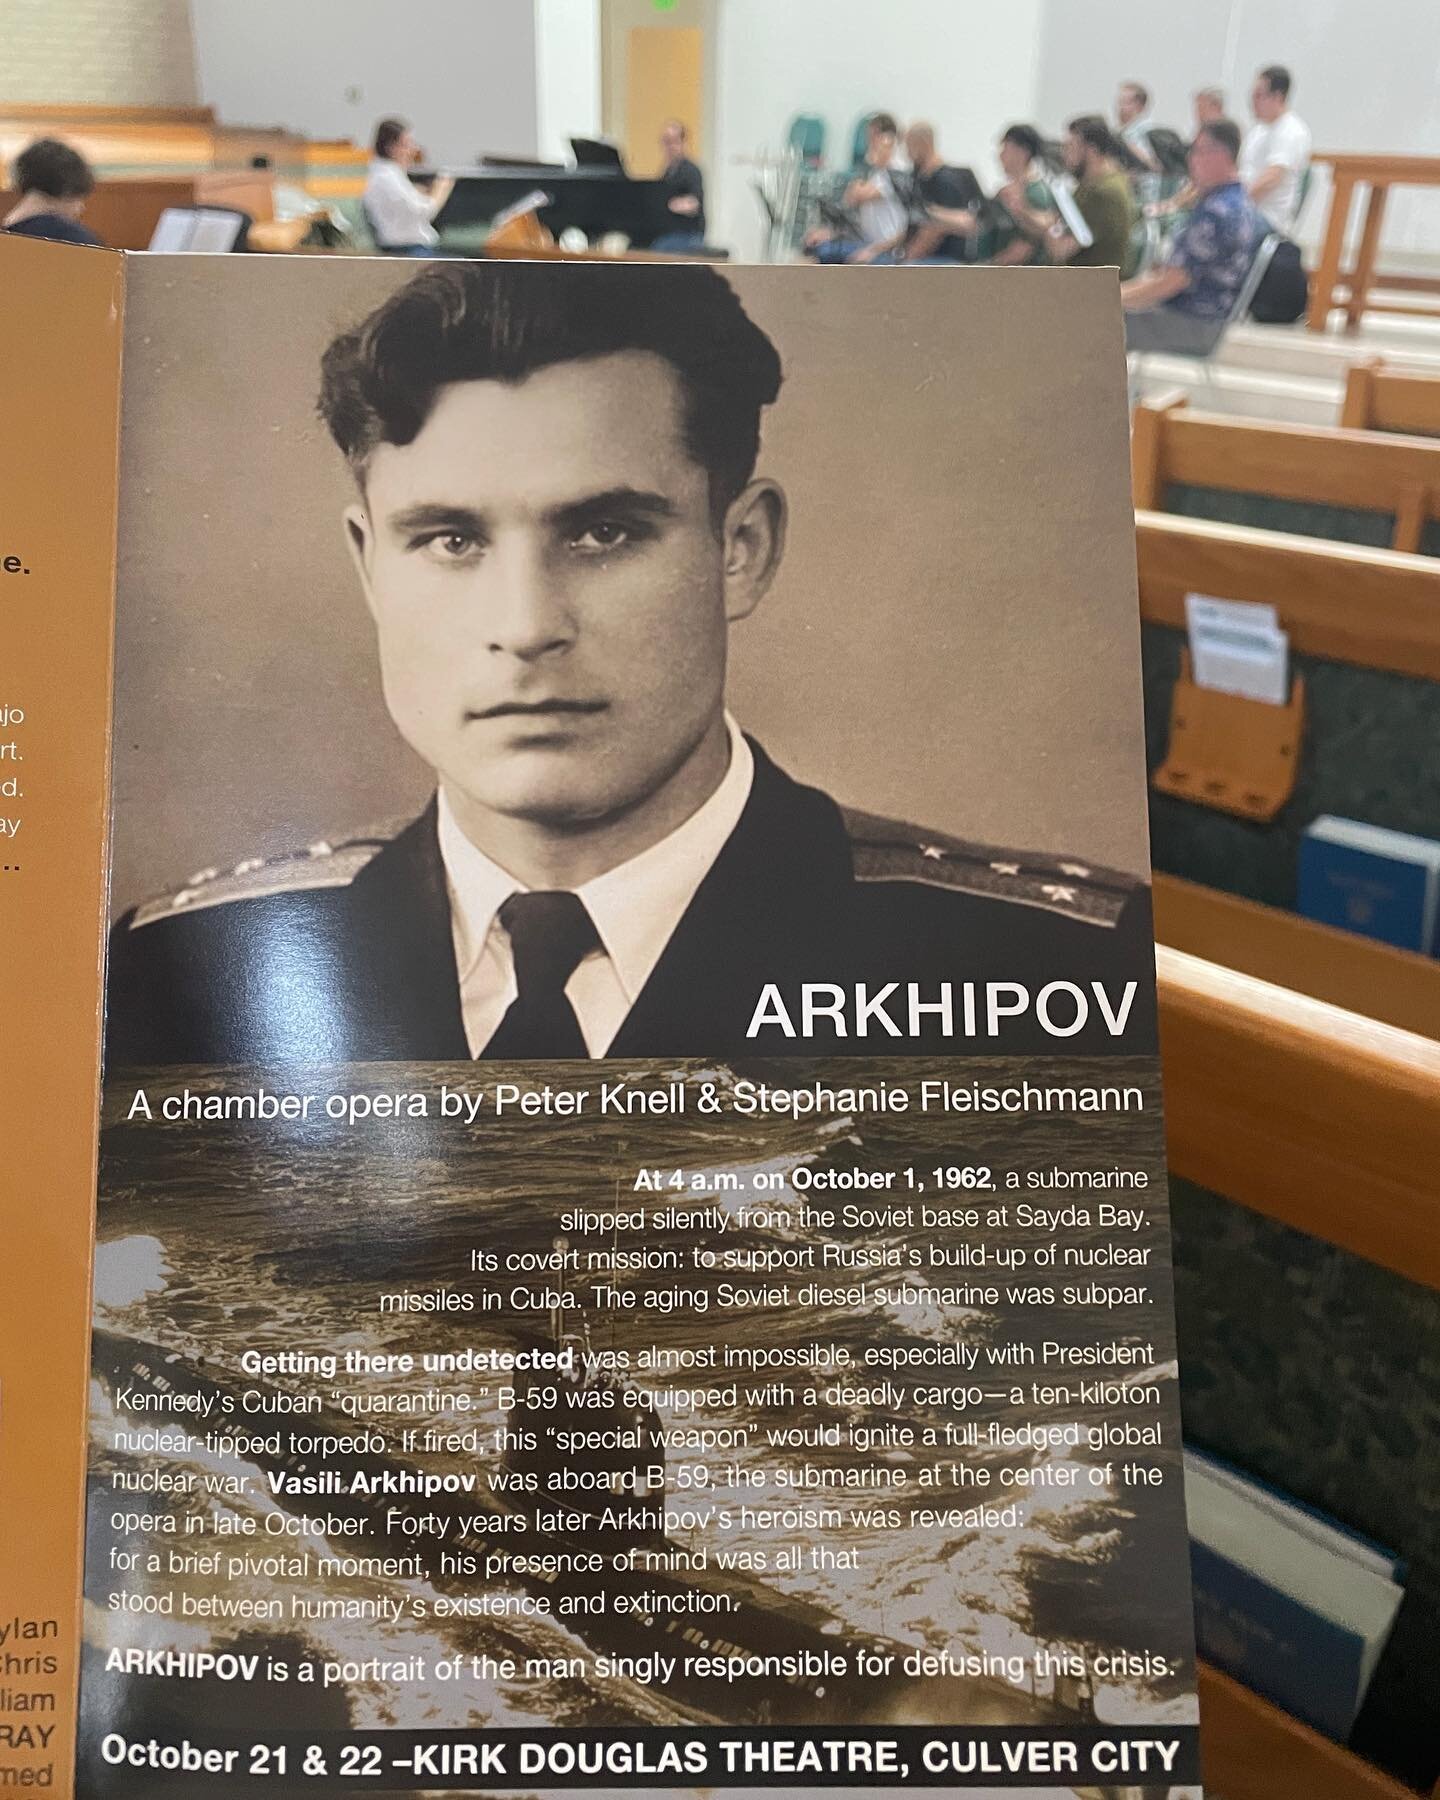 New Opera Alert!! World premiere of Arkhipov Oct. 21 &amp; 22 in Culver City, at @kirkdouglastheatre 

Composed by Peter Knell
Libretto by @stephaniefleischmann 
Conducted by @dcandillari 
Director: @elkhanahpulitzer 
Dramaturg @cjeamadeus 
Producer: